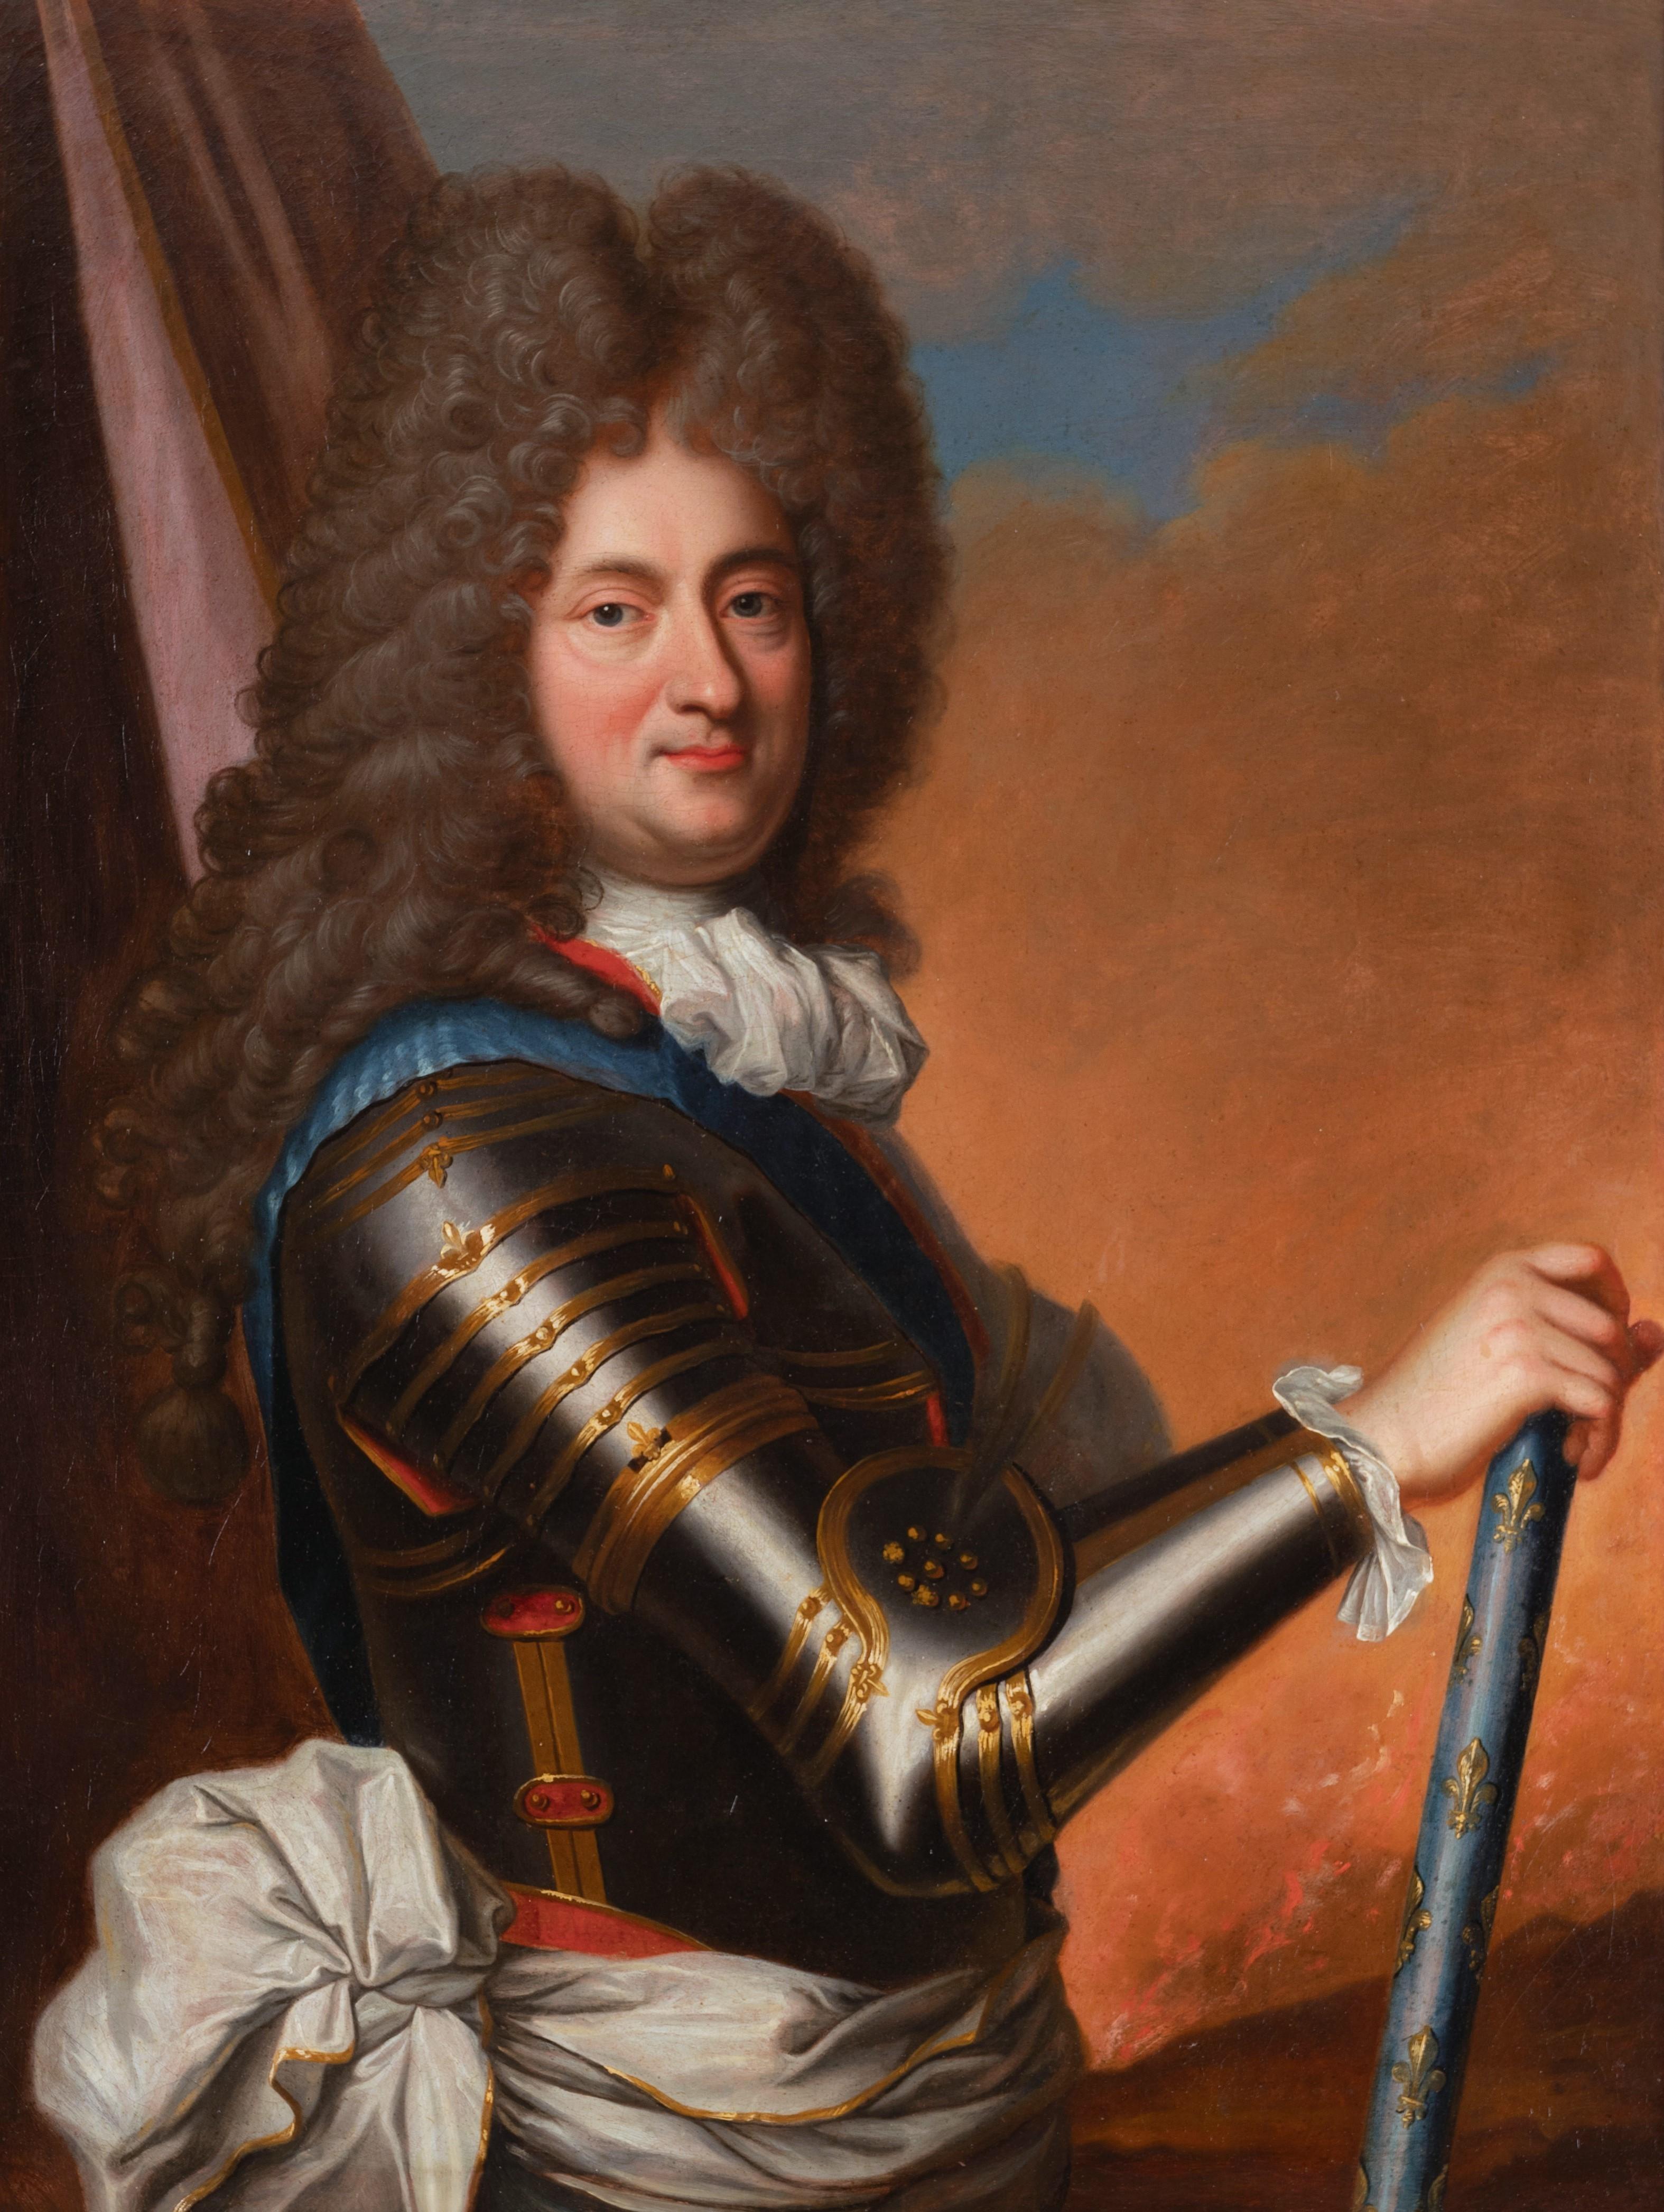 Philippe II, Duke of Orleans, French prince, 18th c. French school - Painting by Jean Baptiste Santerre